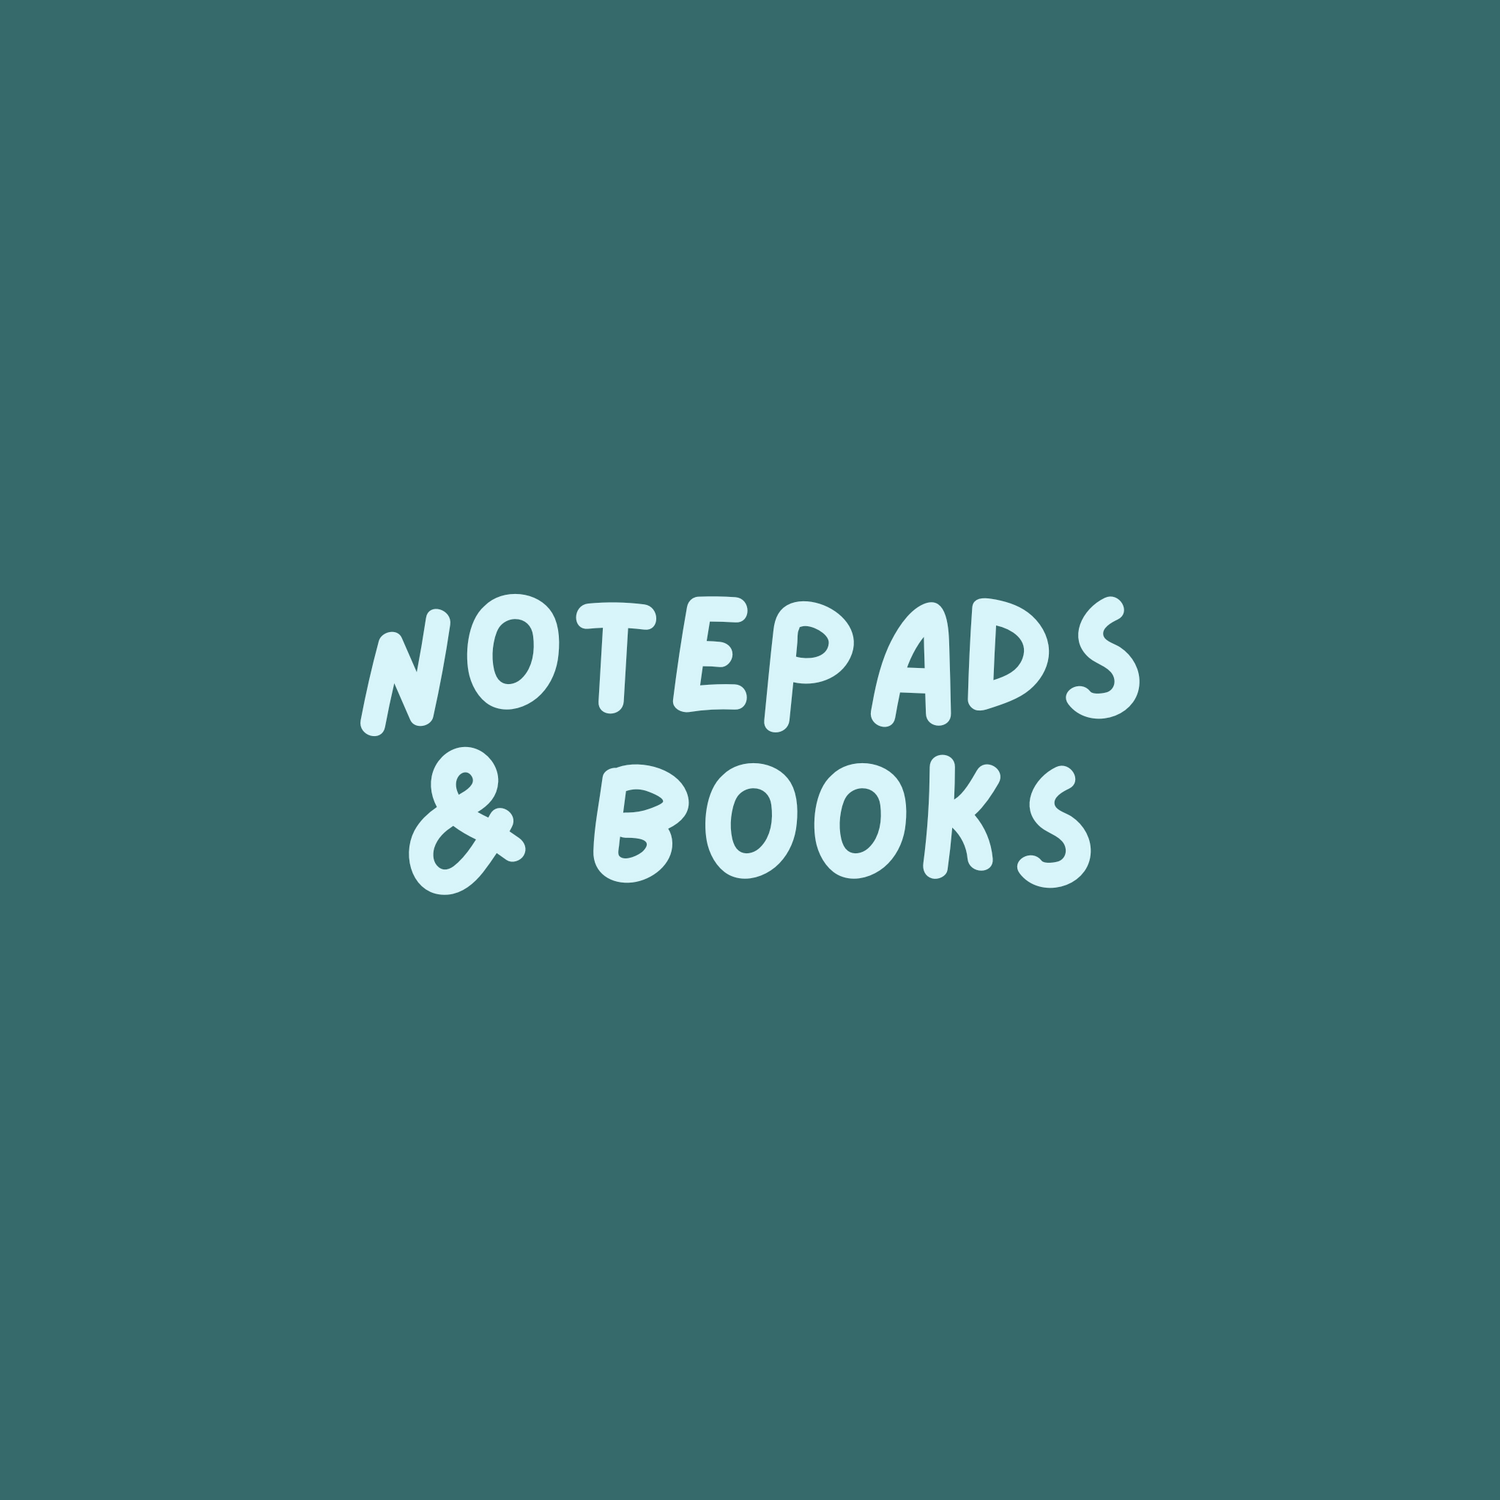 NOTEPADS & BOOKS